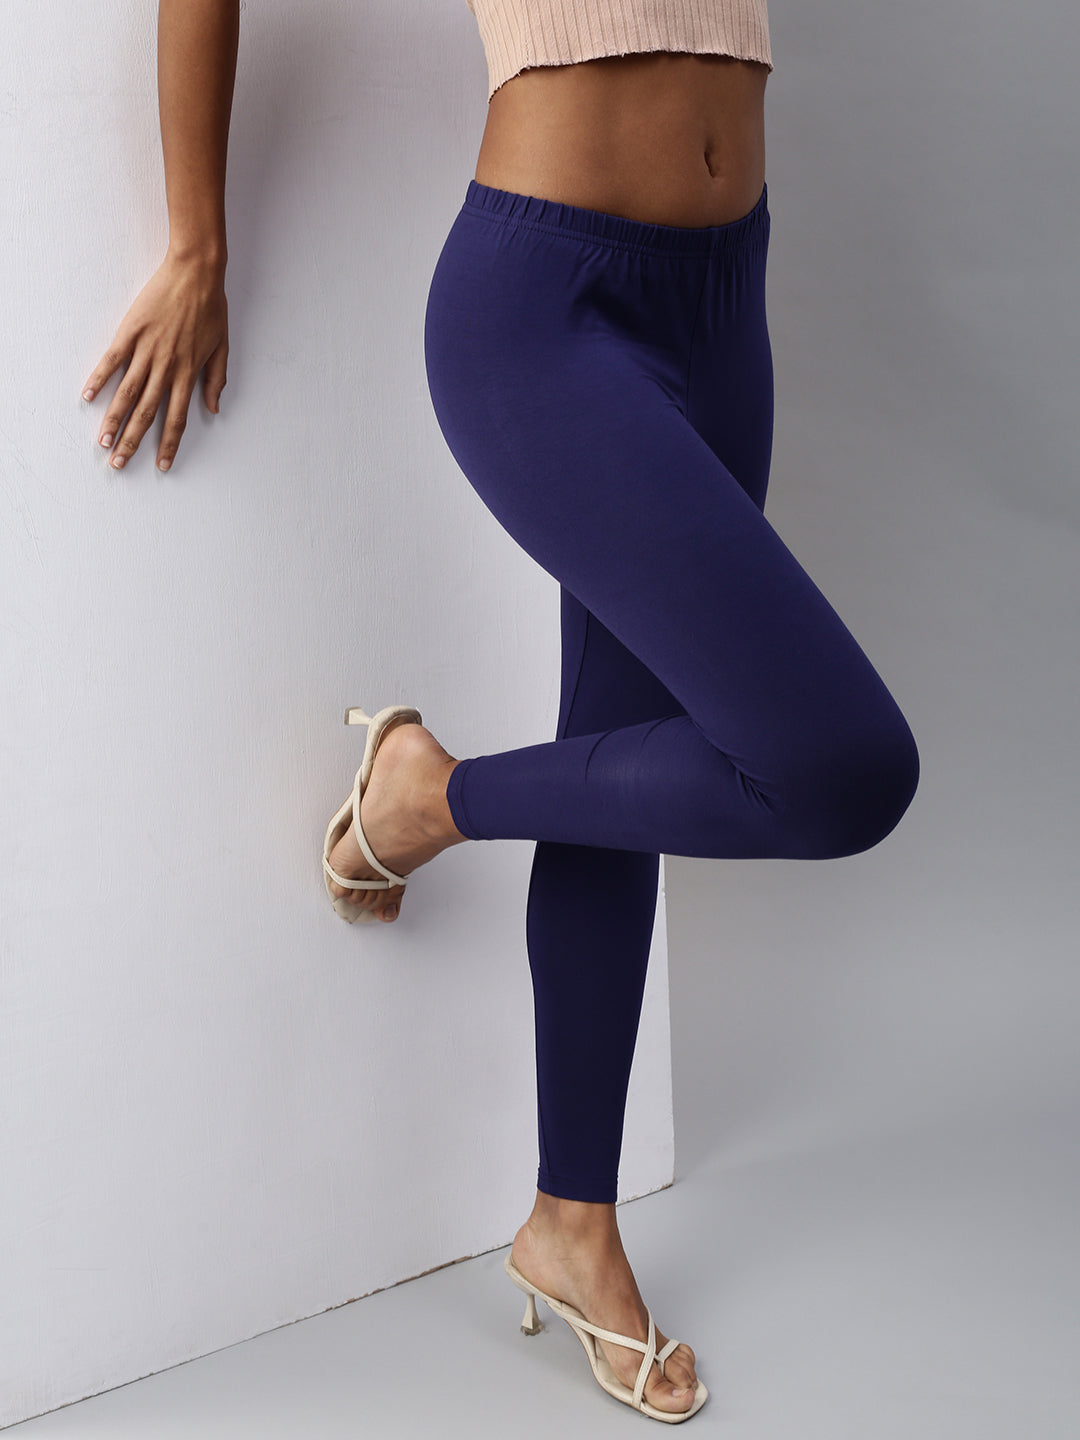 Prisma Ankle Leggings-S in Sundargarh at best price by Rounaq